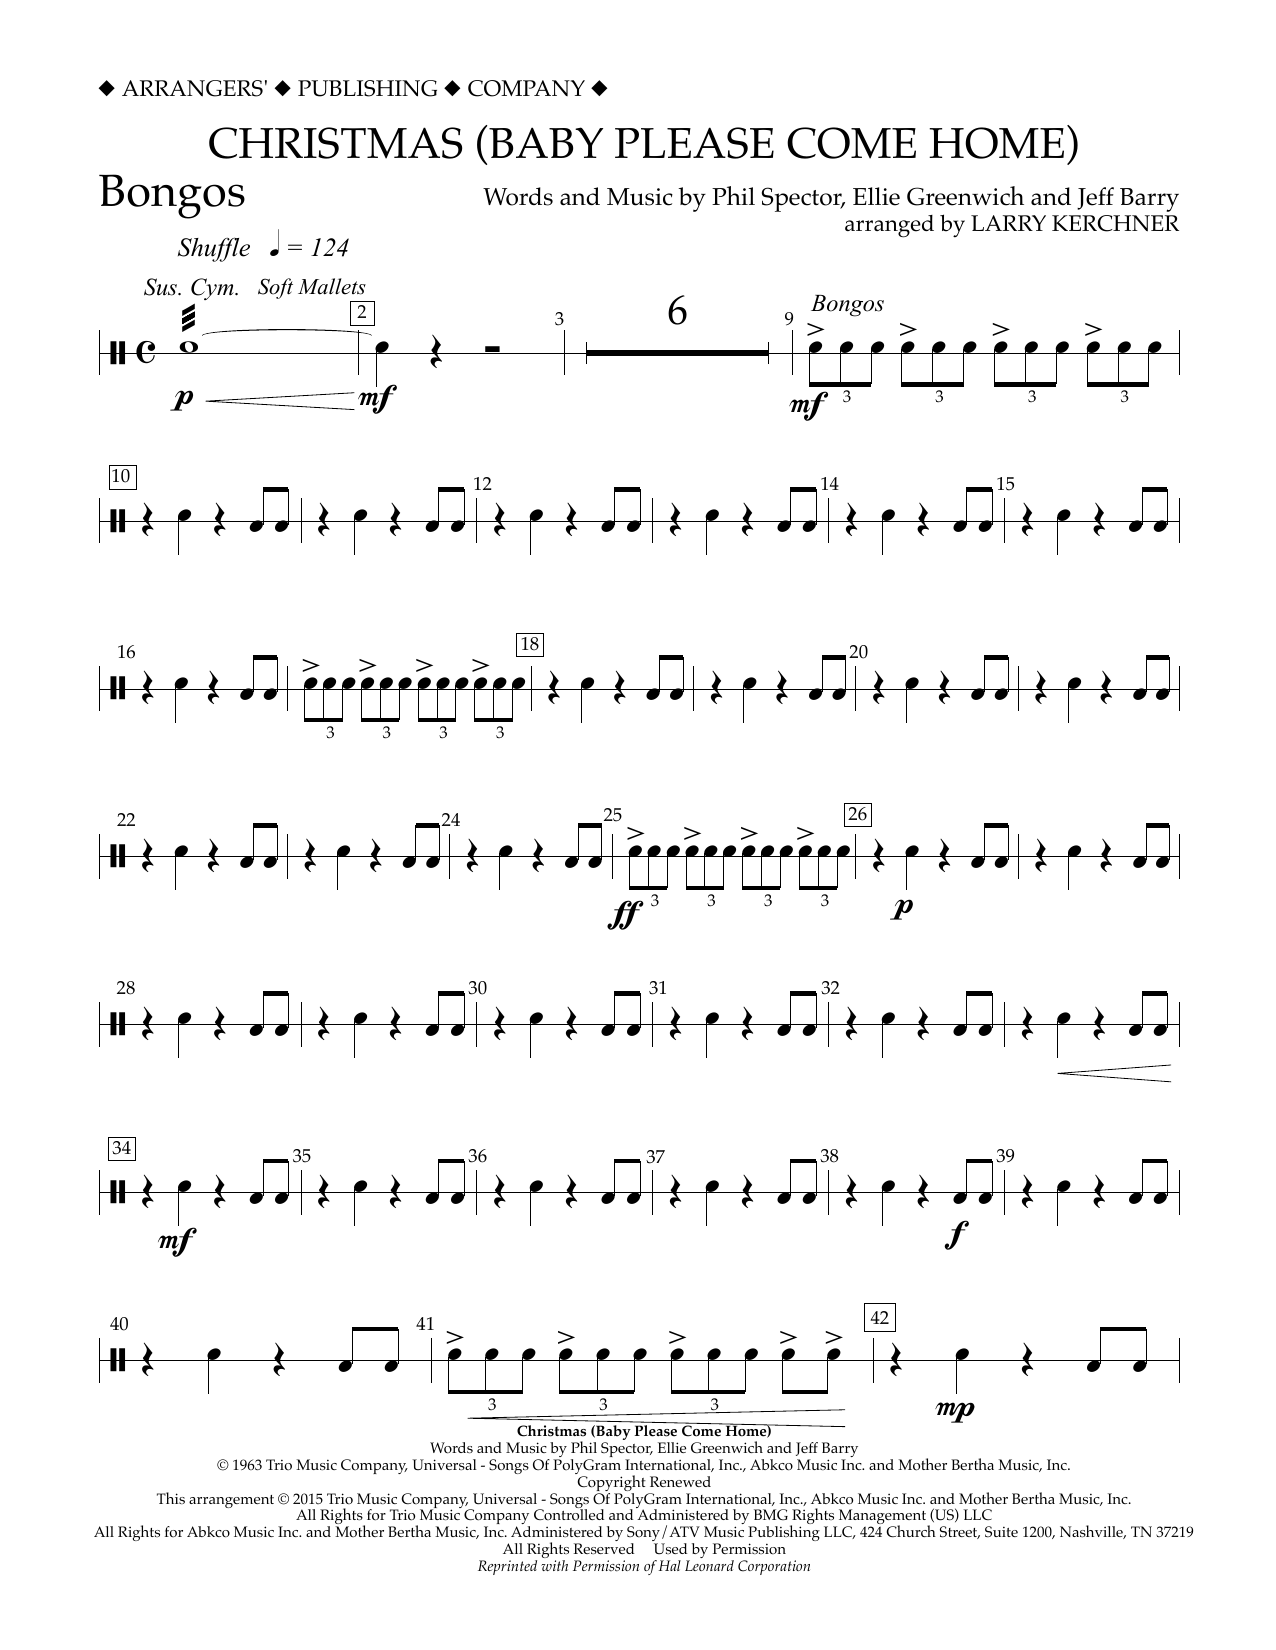 Download Larry Kerchner Christmas (Baby Please Come Home) - Bon Sheet Music